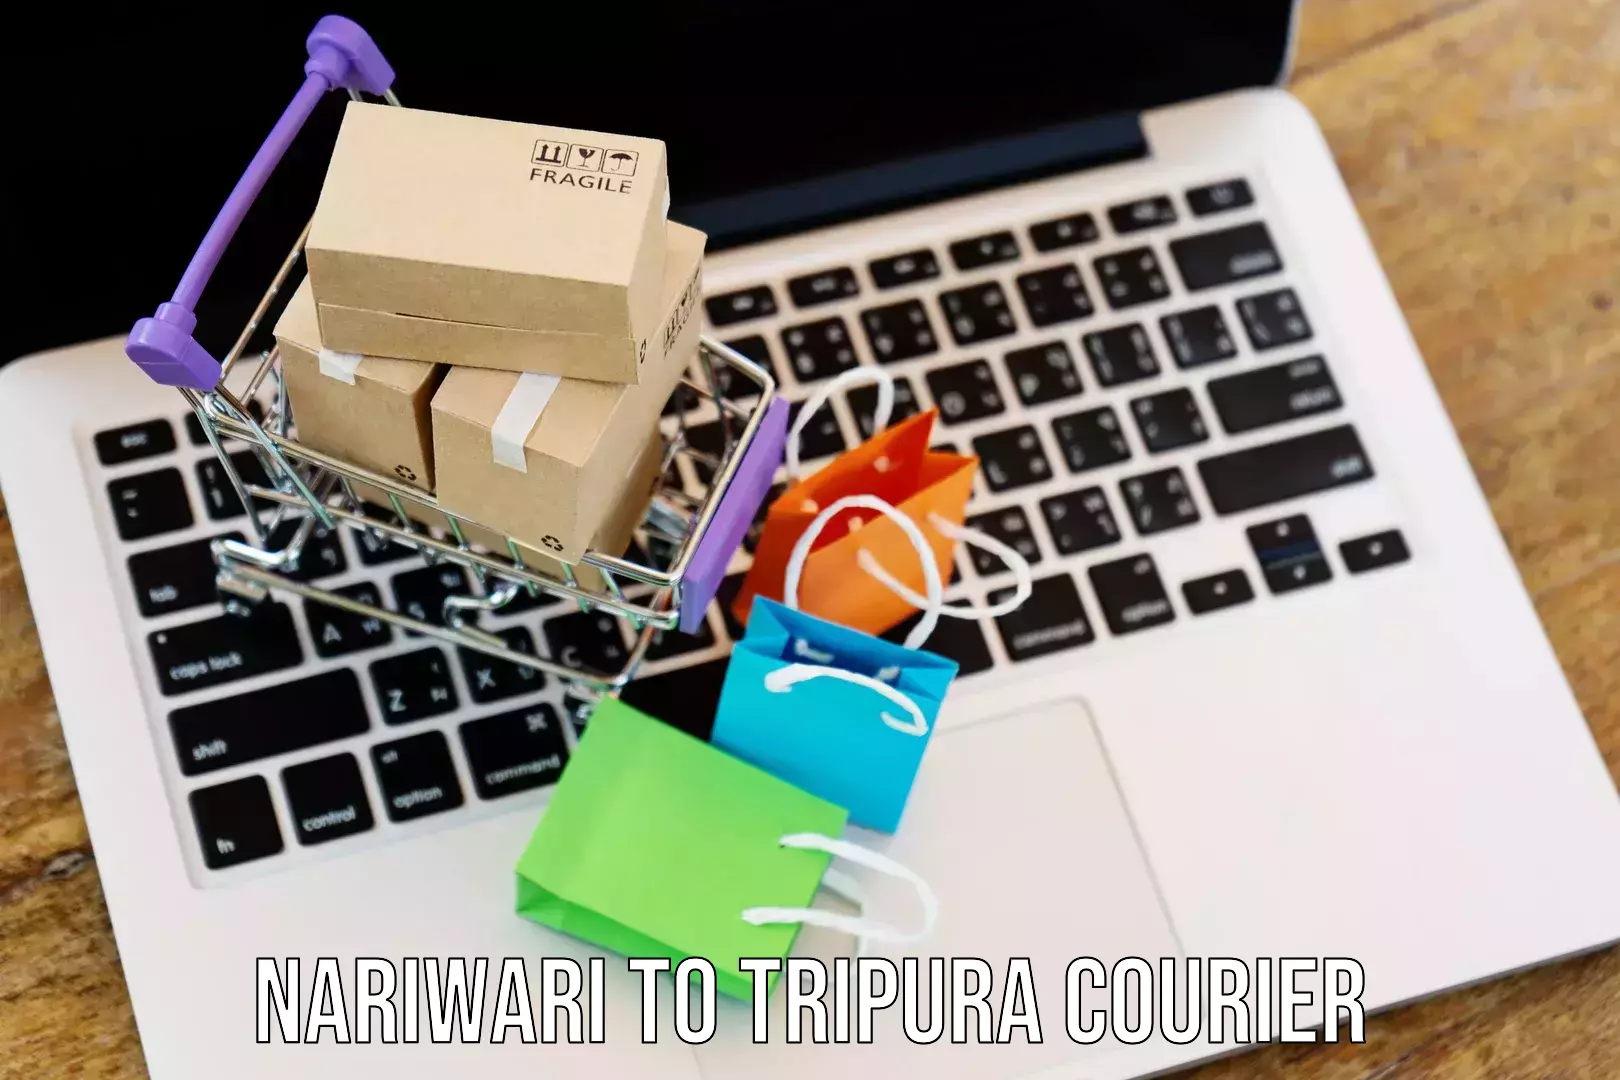 24-hour delivery options Nariwari to Tripura